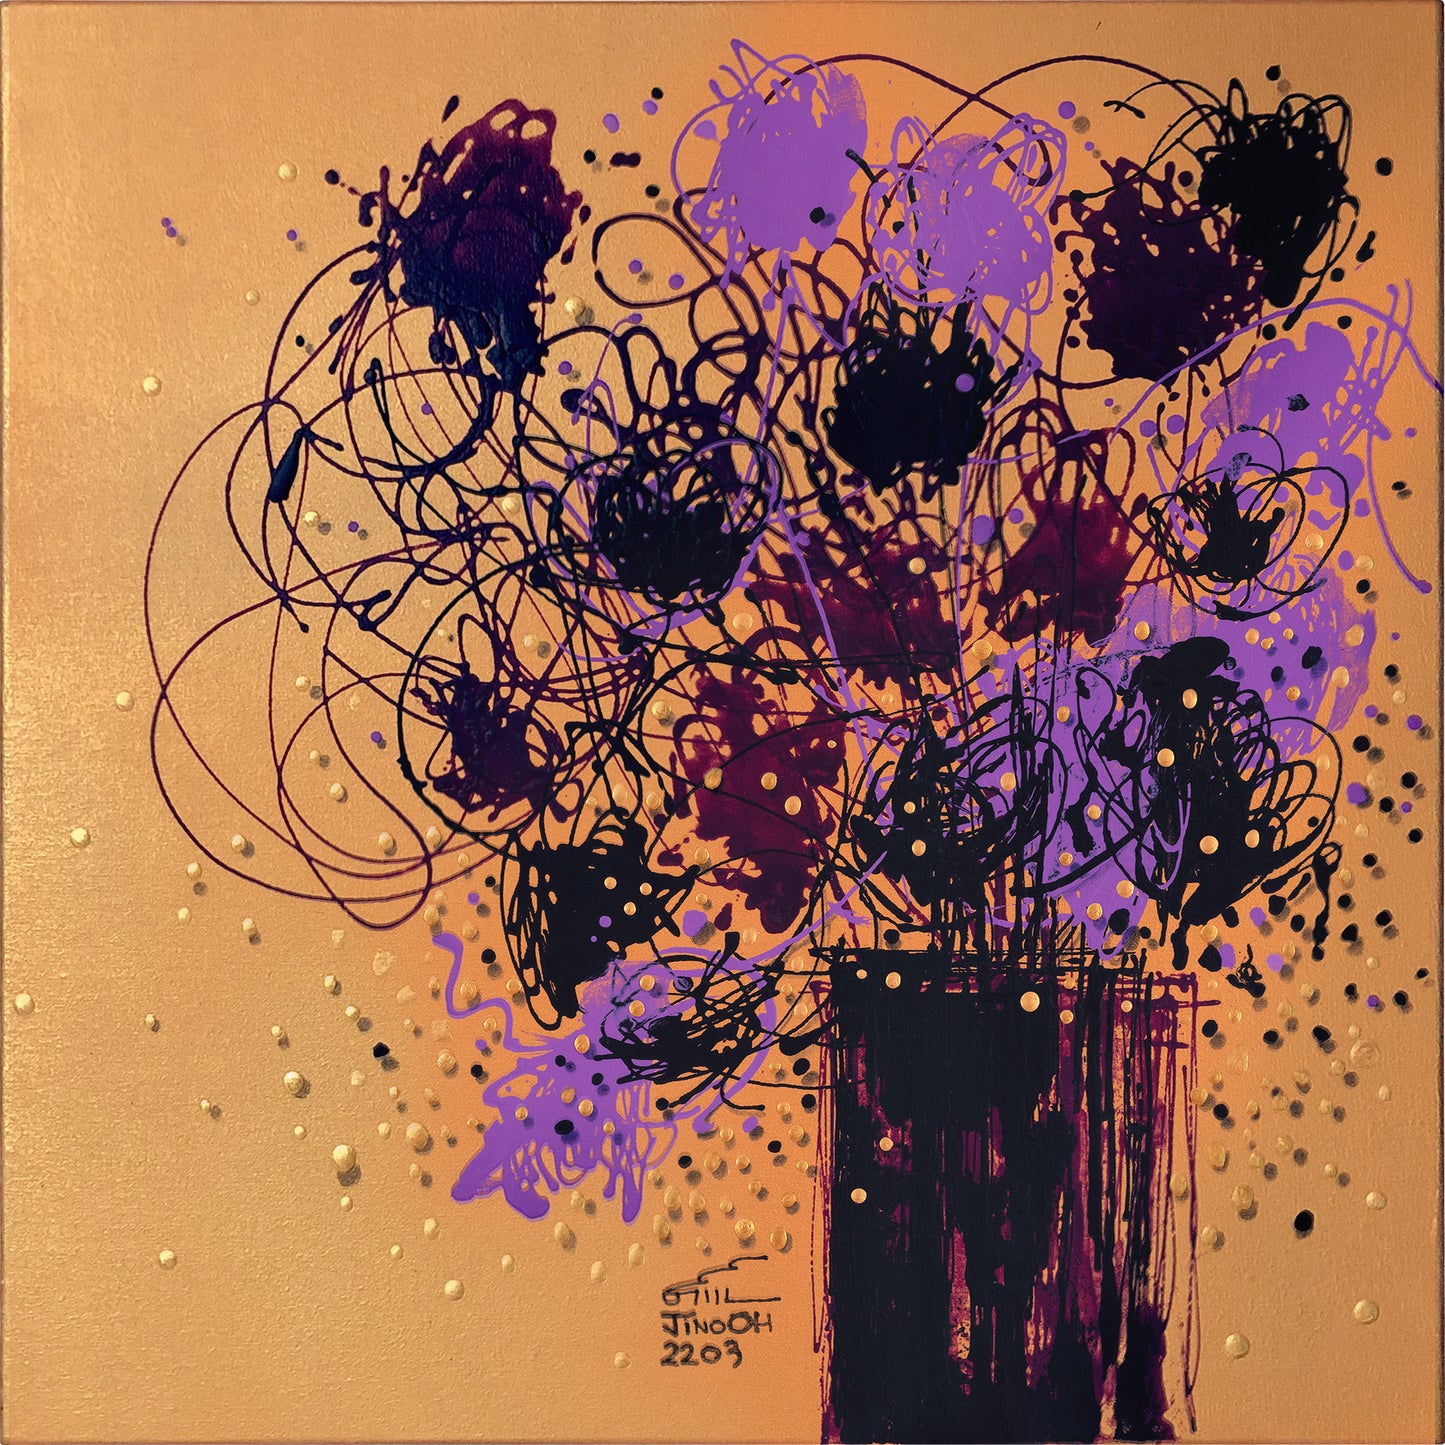 Purple, Gold and Black Floral Abstract Art JA041